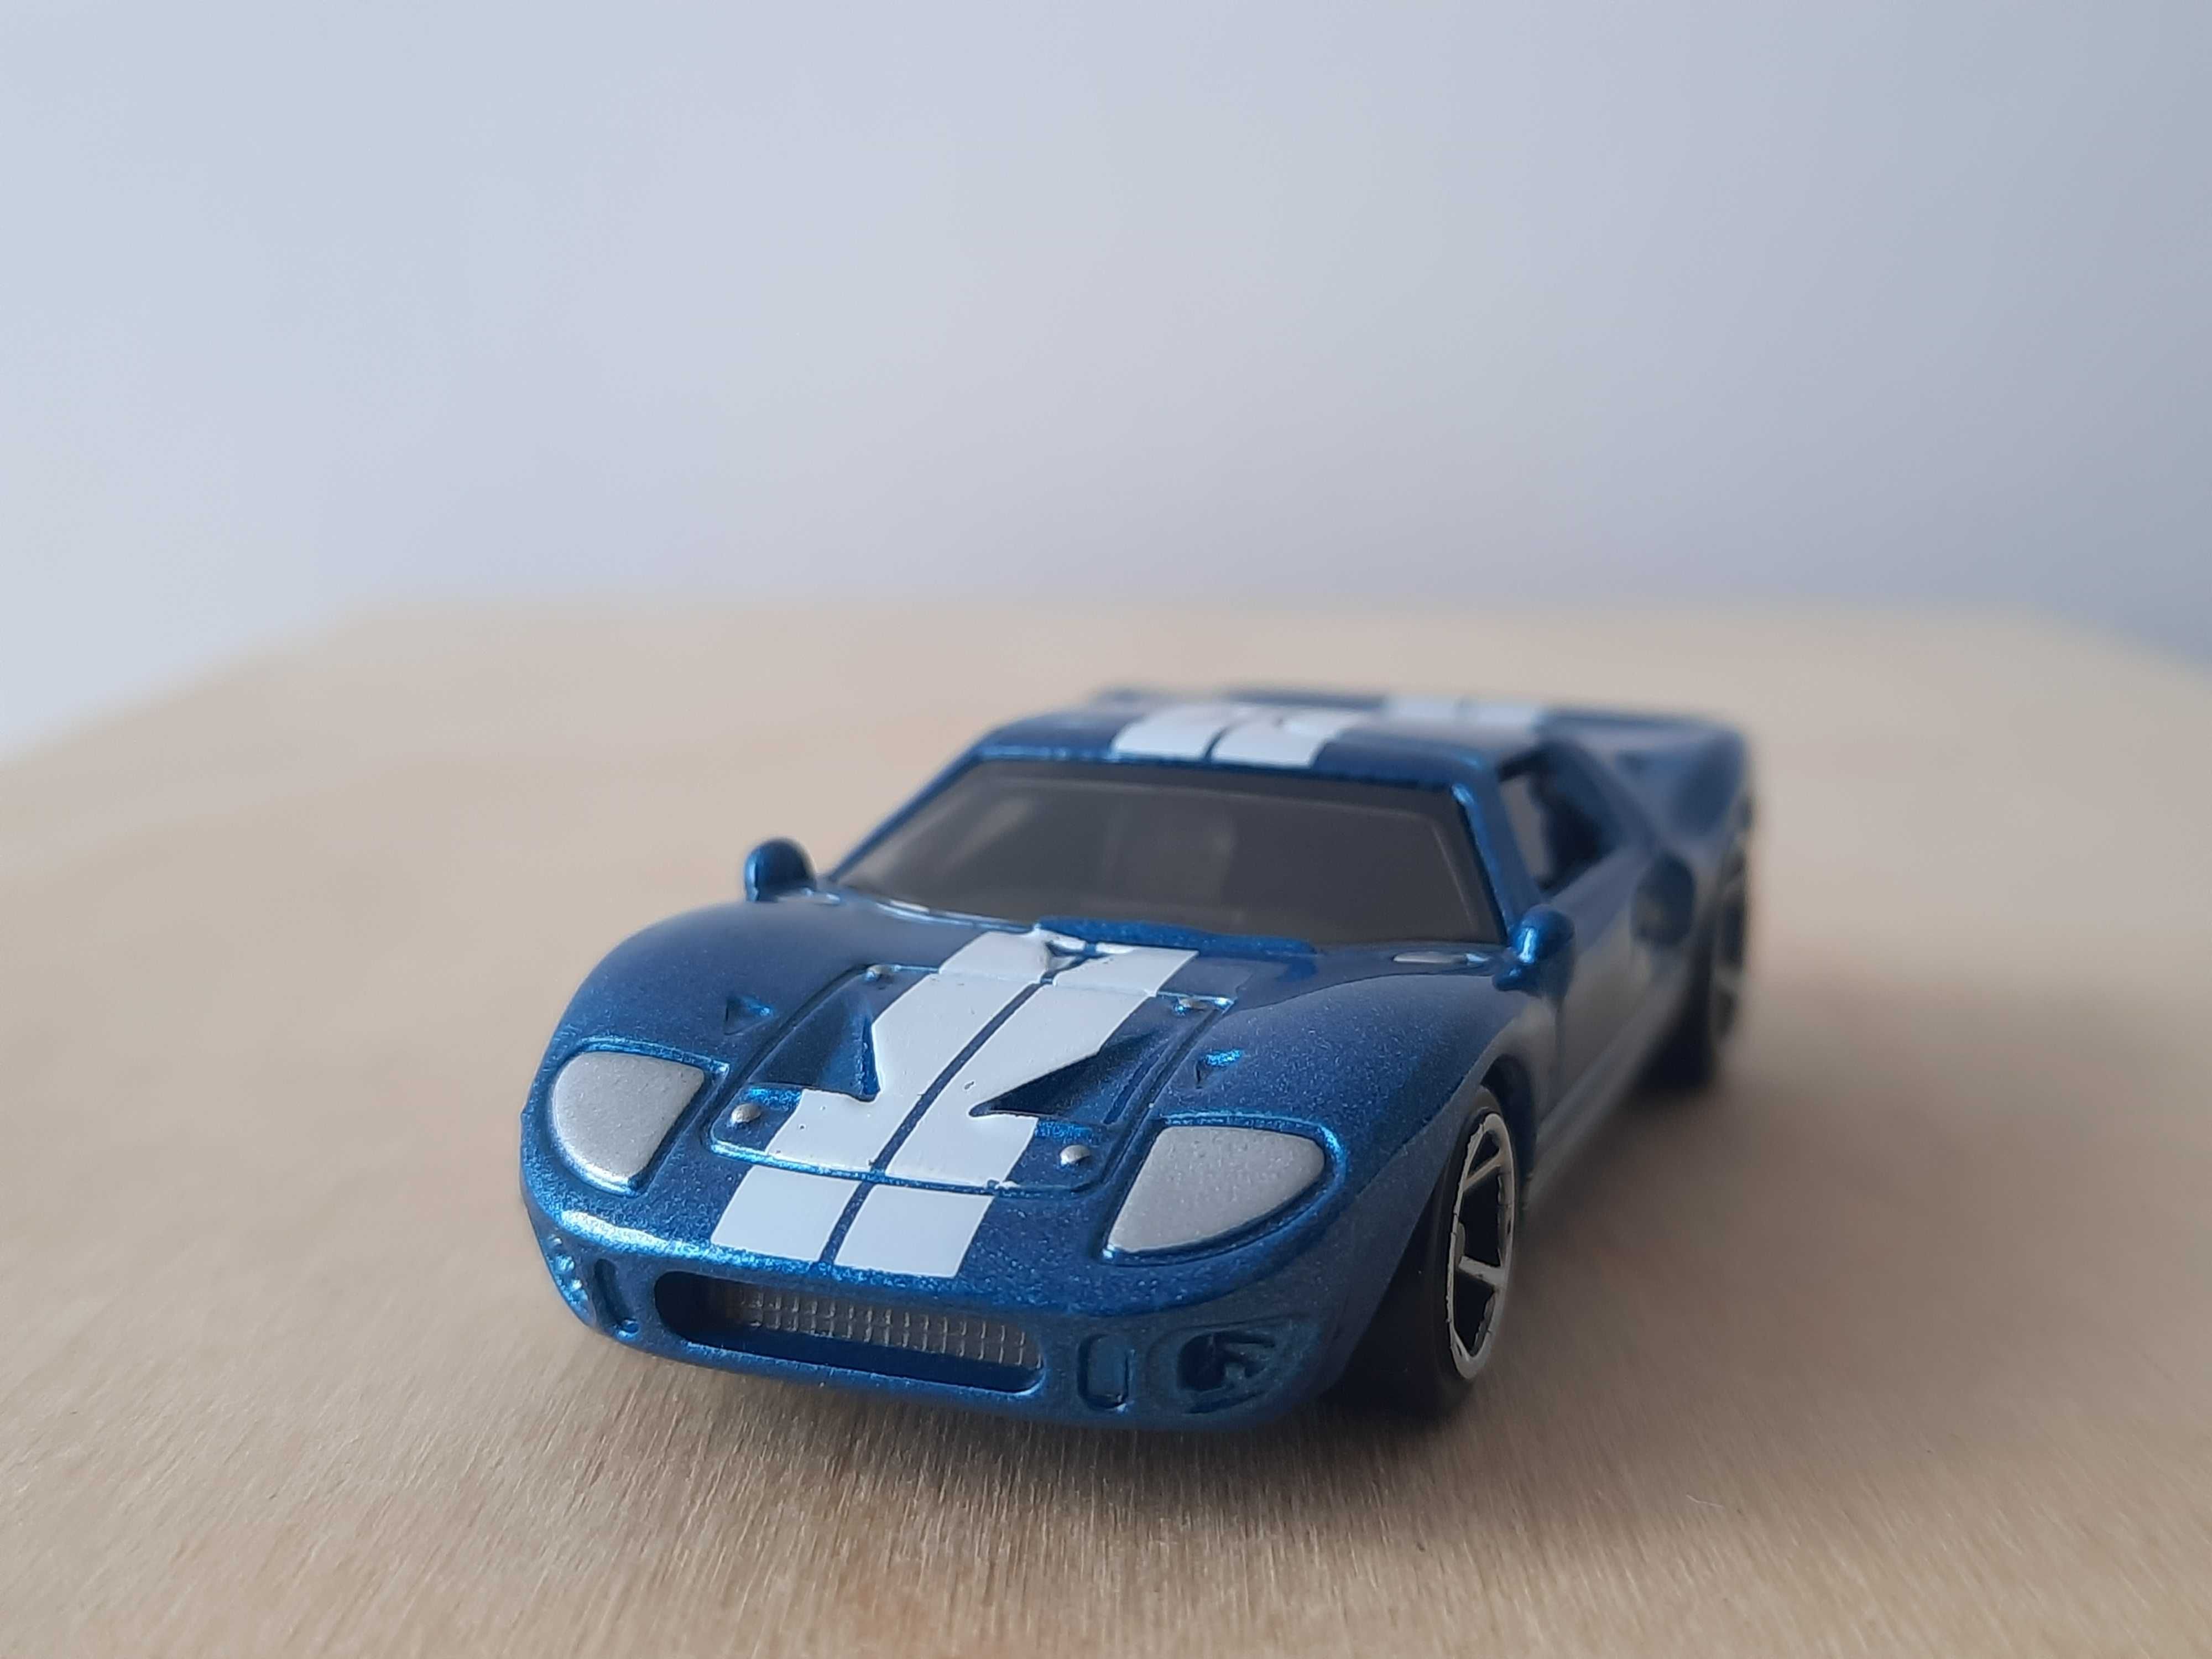 Hot Wheels Ford GT-40